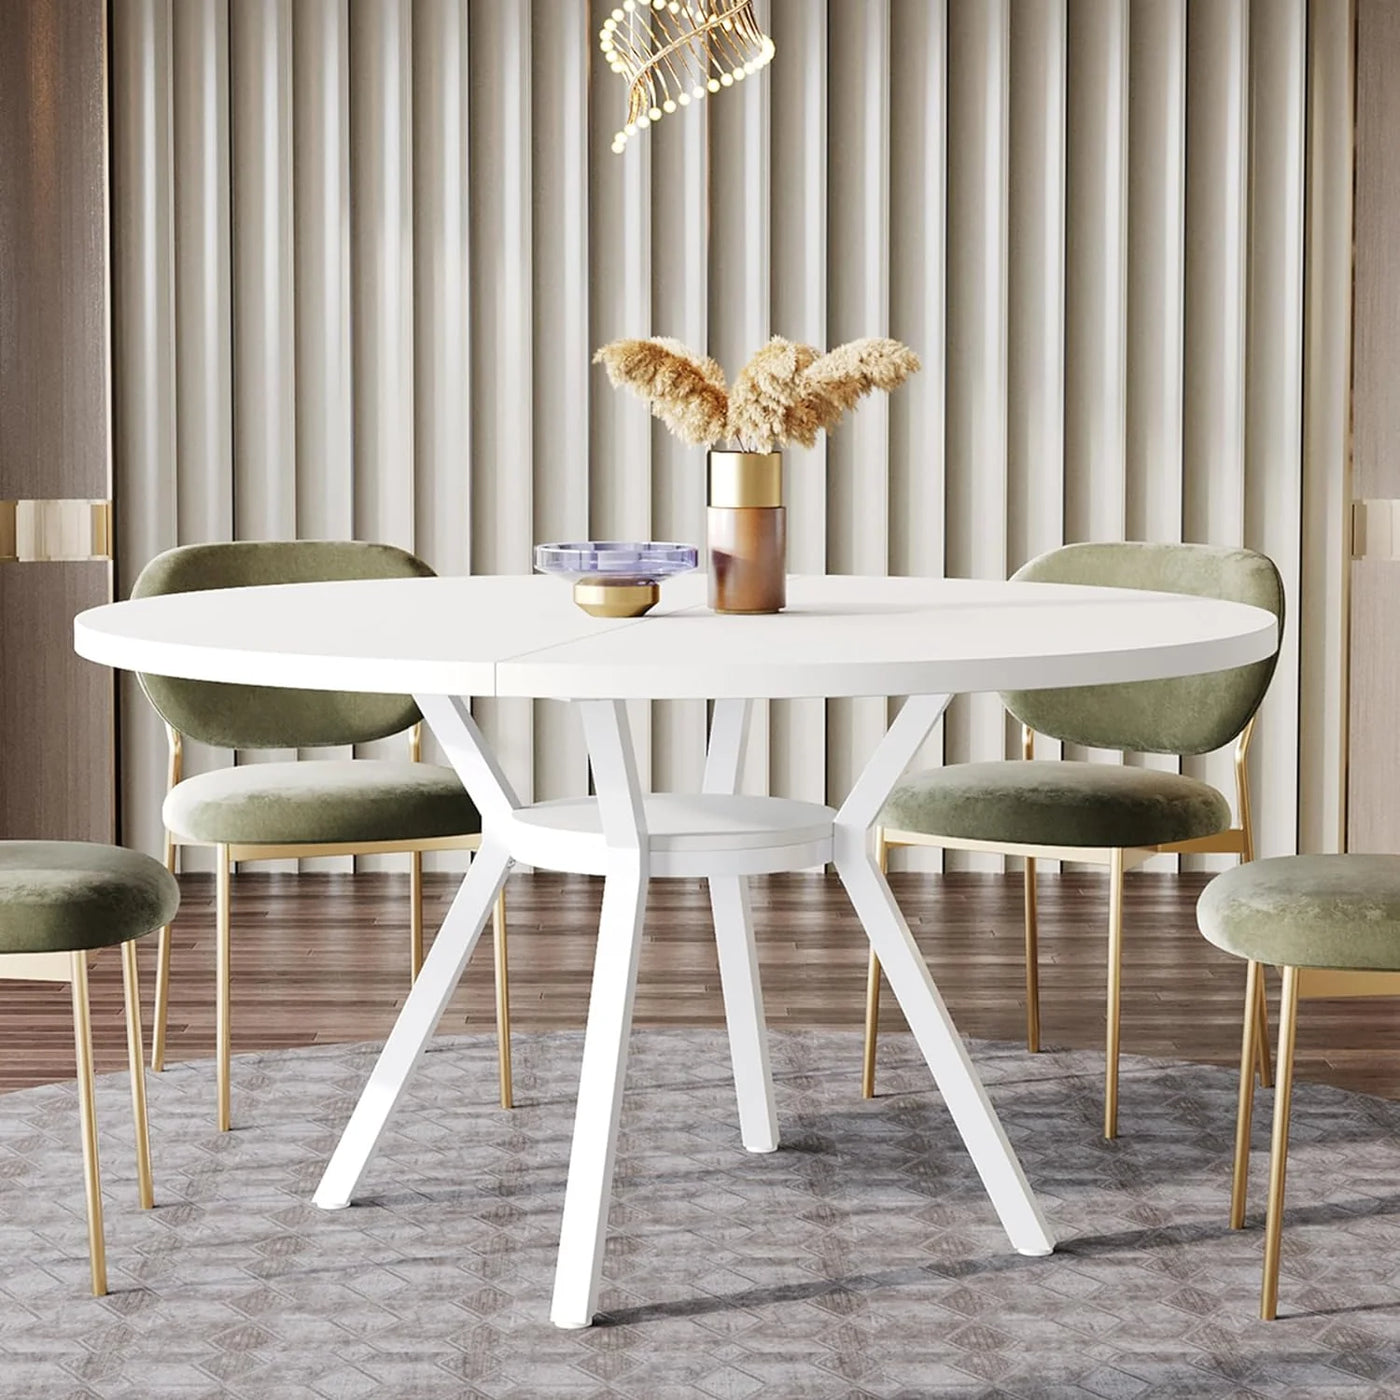 Aimee 47" Dining Table | White Wood Modern Round Kitchen Table for 4